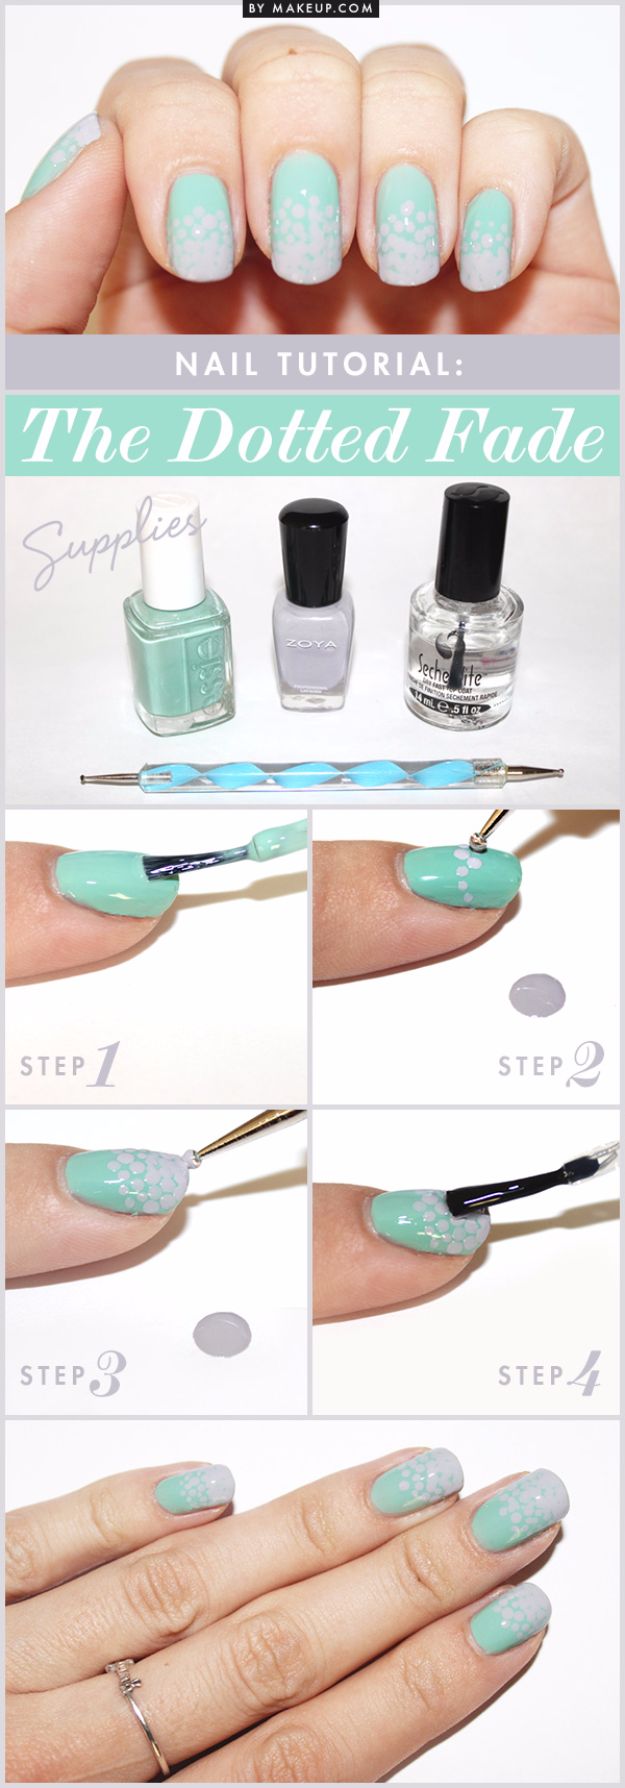 Easy Ways to Paint Nails - Dotted Fade Manicure - Quick Tips and Tricks for Manicures at Home - Nail Designs and Art Ideas for Simple DIY Pedicures and Manicure at Home - Hacks and Tutorials with Cool Step by Step Instructions and Tutorials - DIY Projects and Crafts by DIY JOY 